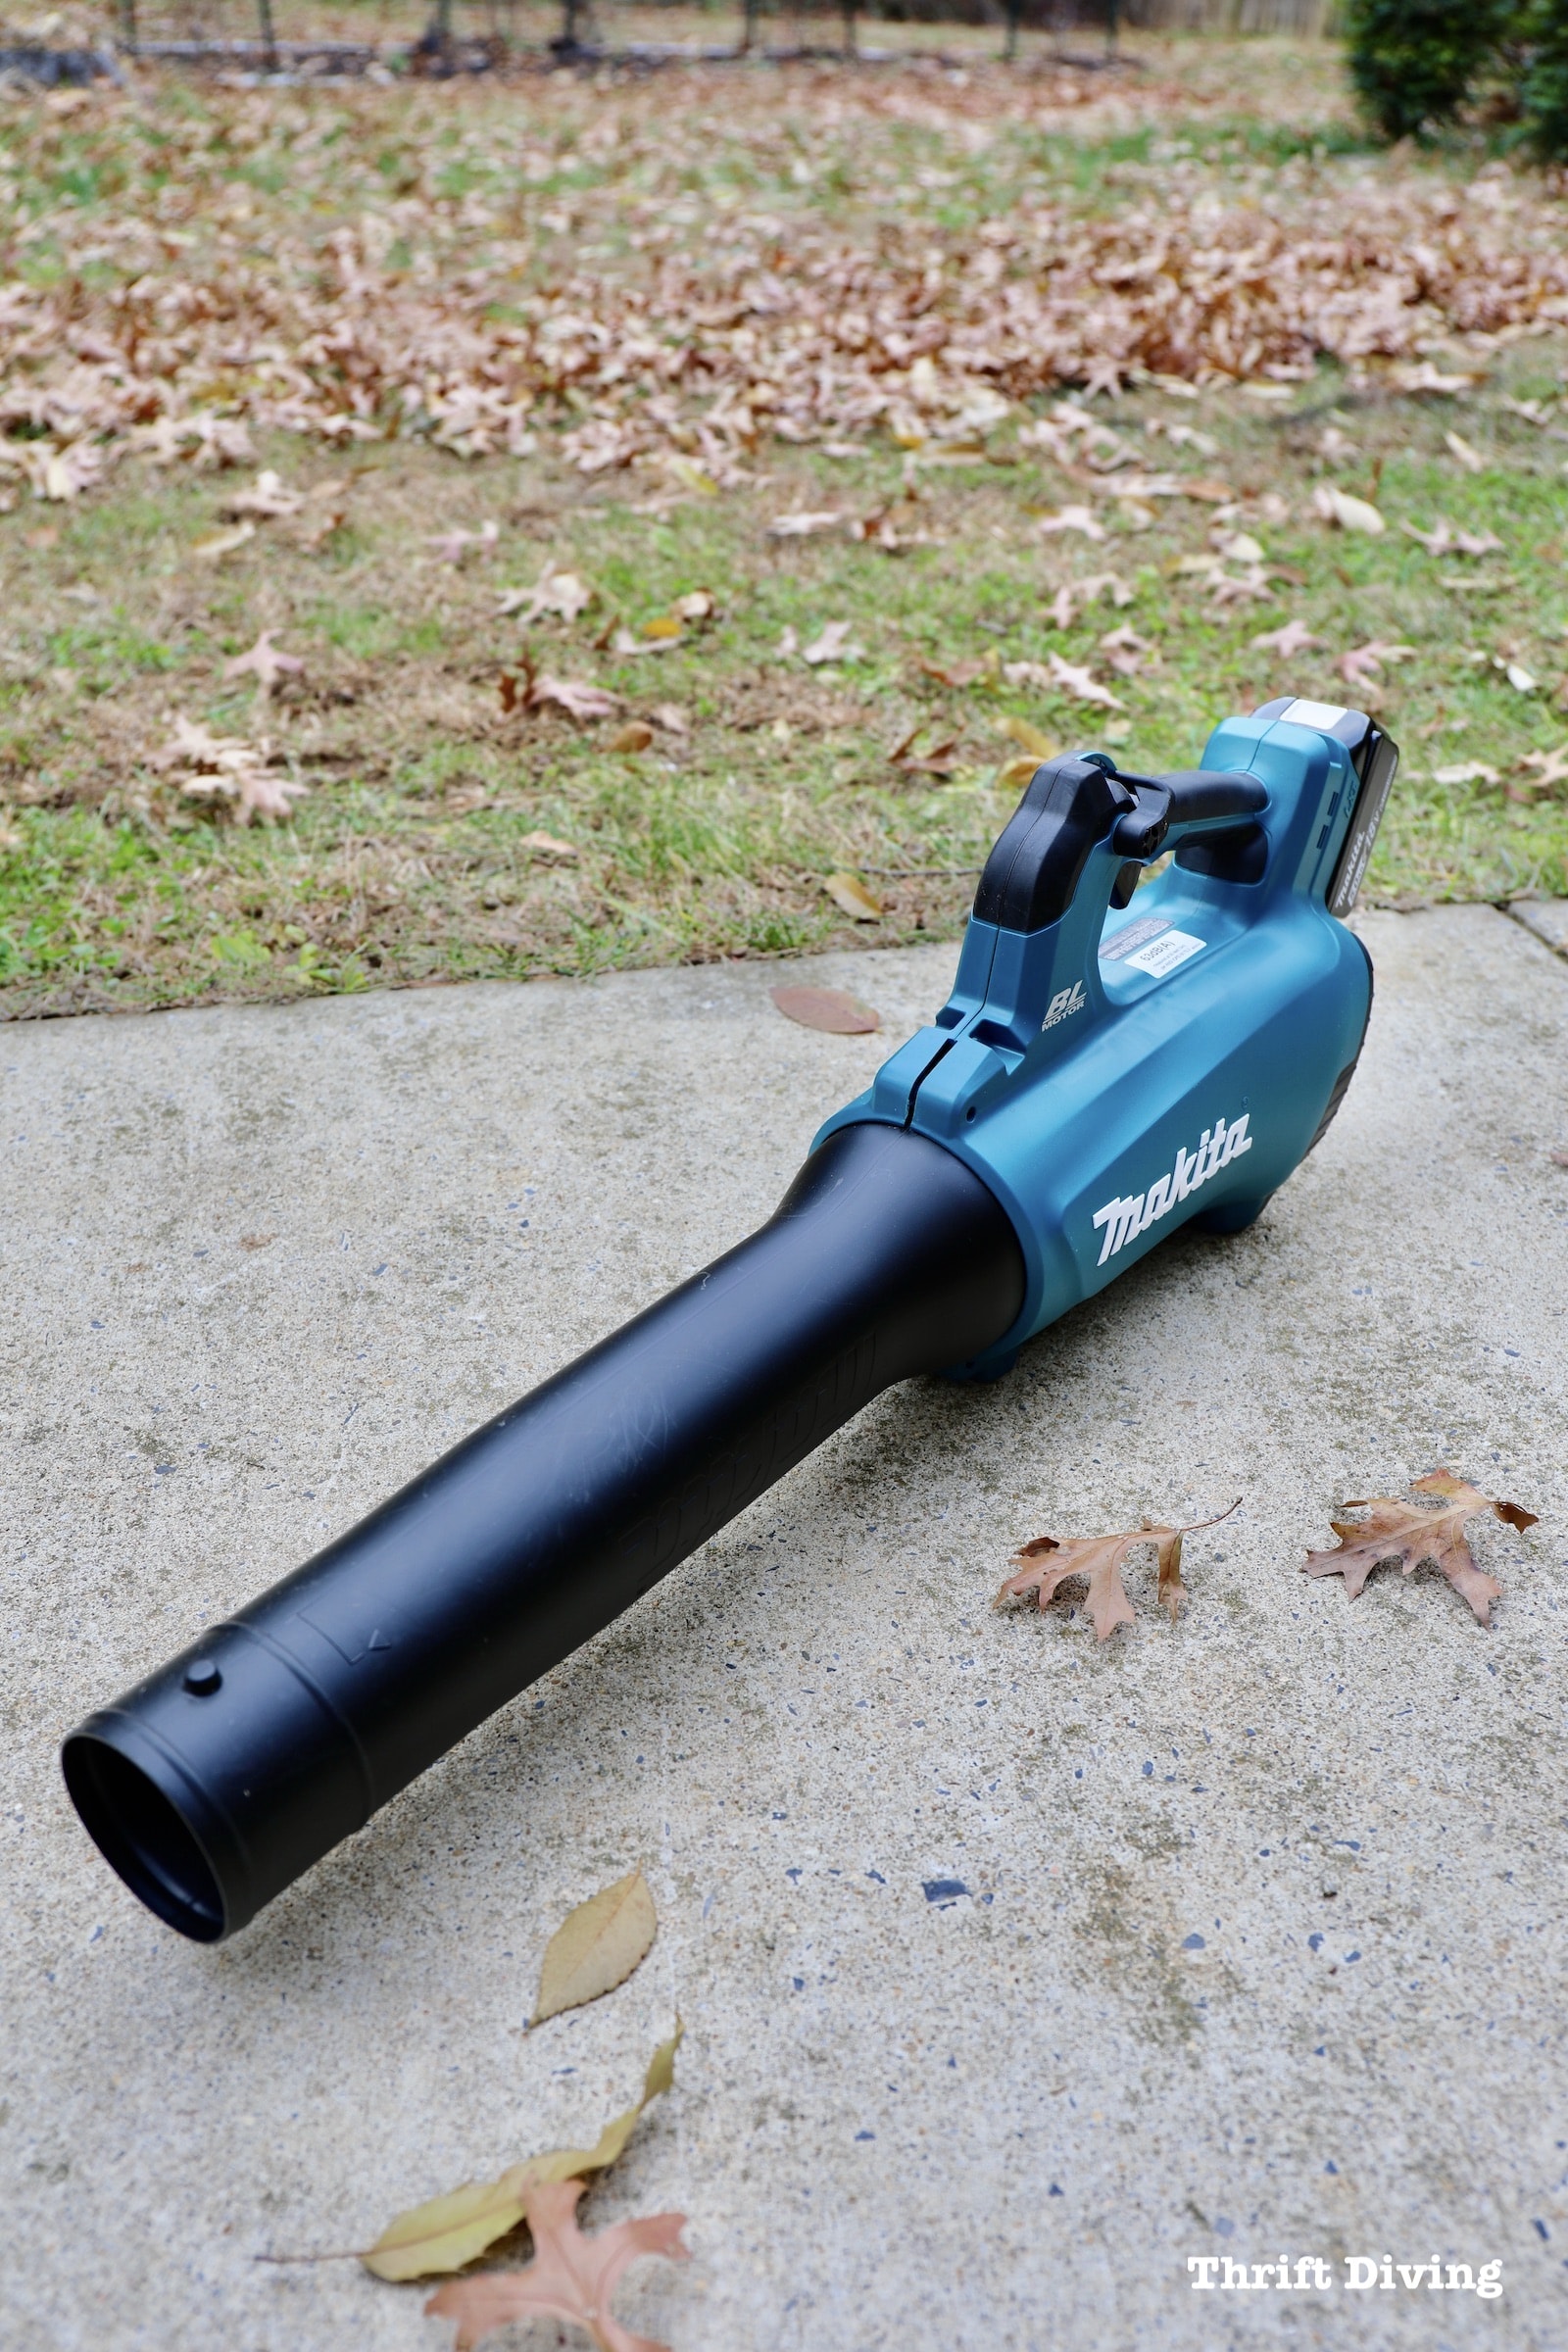 Which Leaf Blower is the Best? Battery vs. Gas (and a Makita Leaf Blower Review)